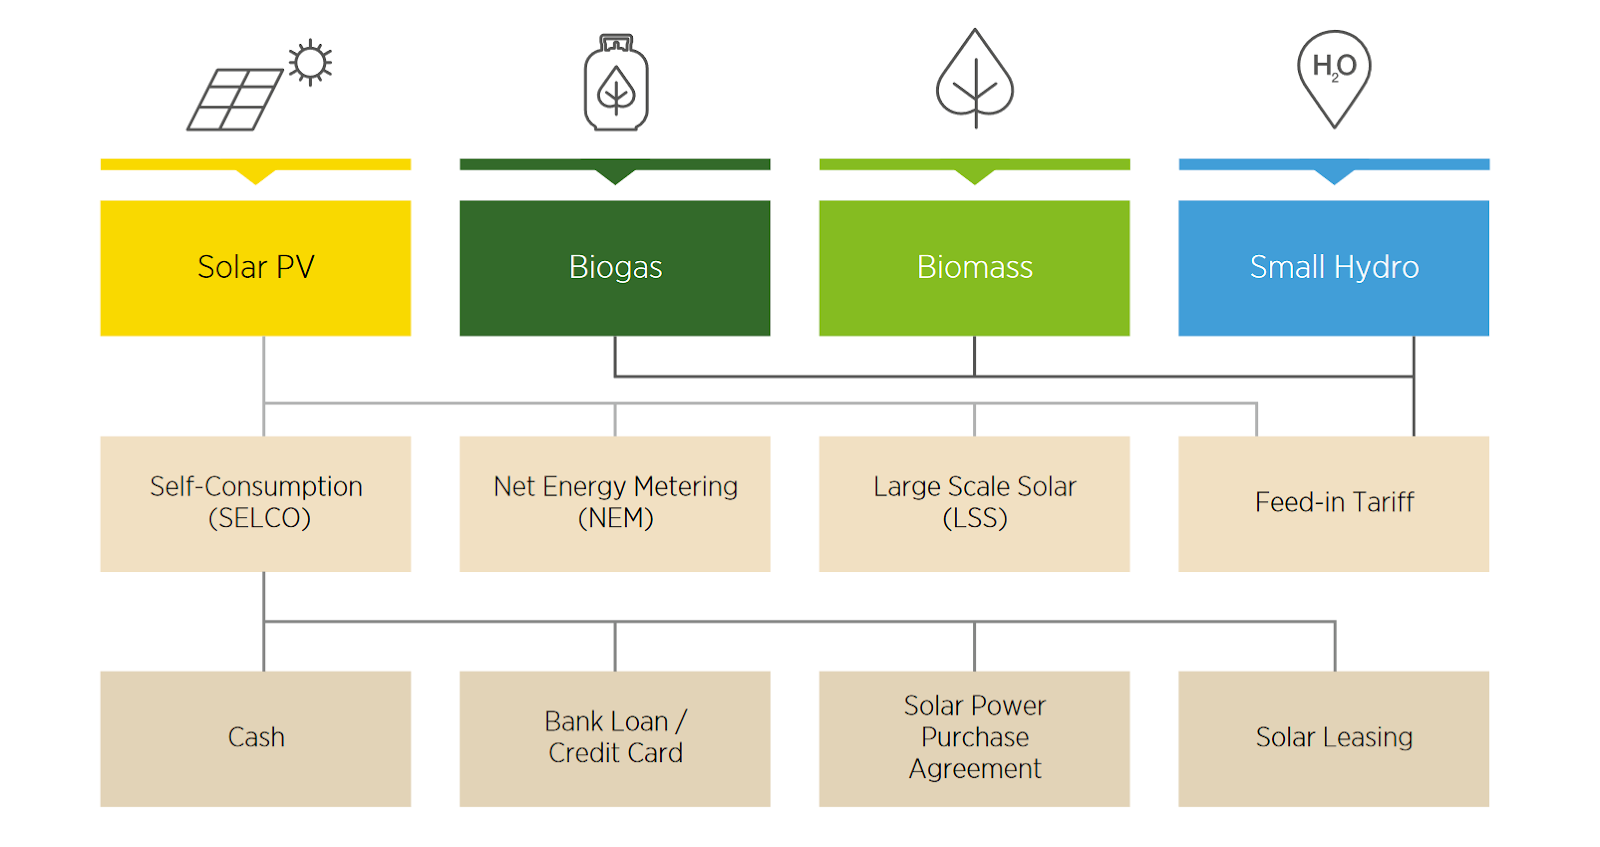 Overview of the Renewable Energy Regulatory Framework and the Available Financing Instruments in Malaysia, Source: IRENA